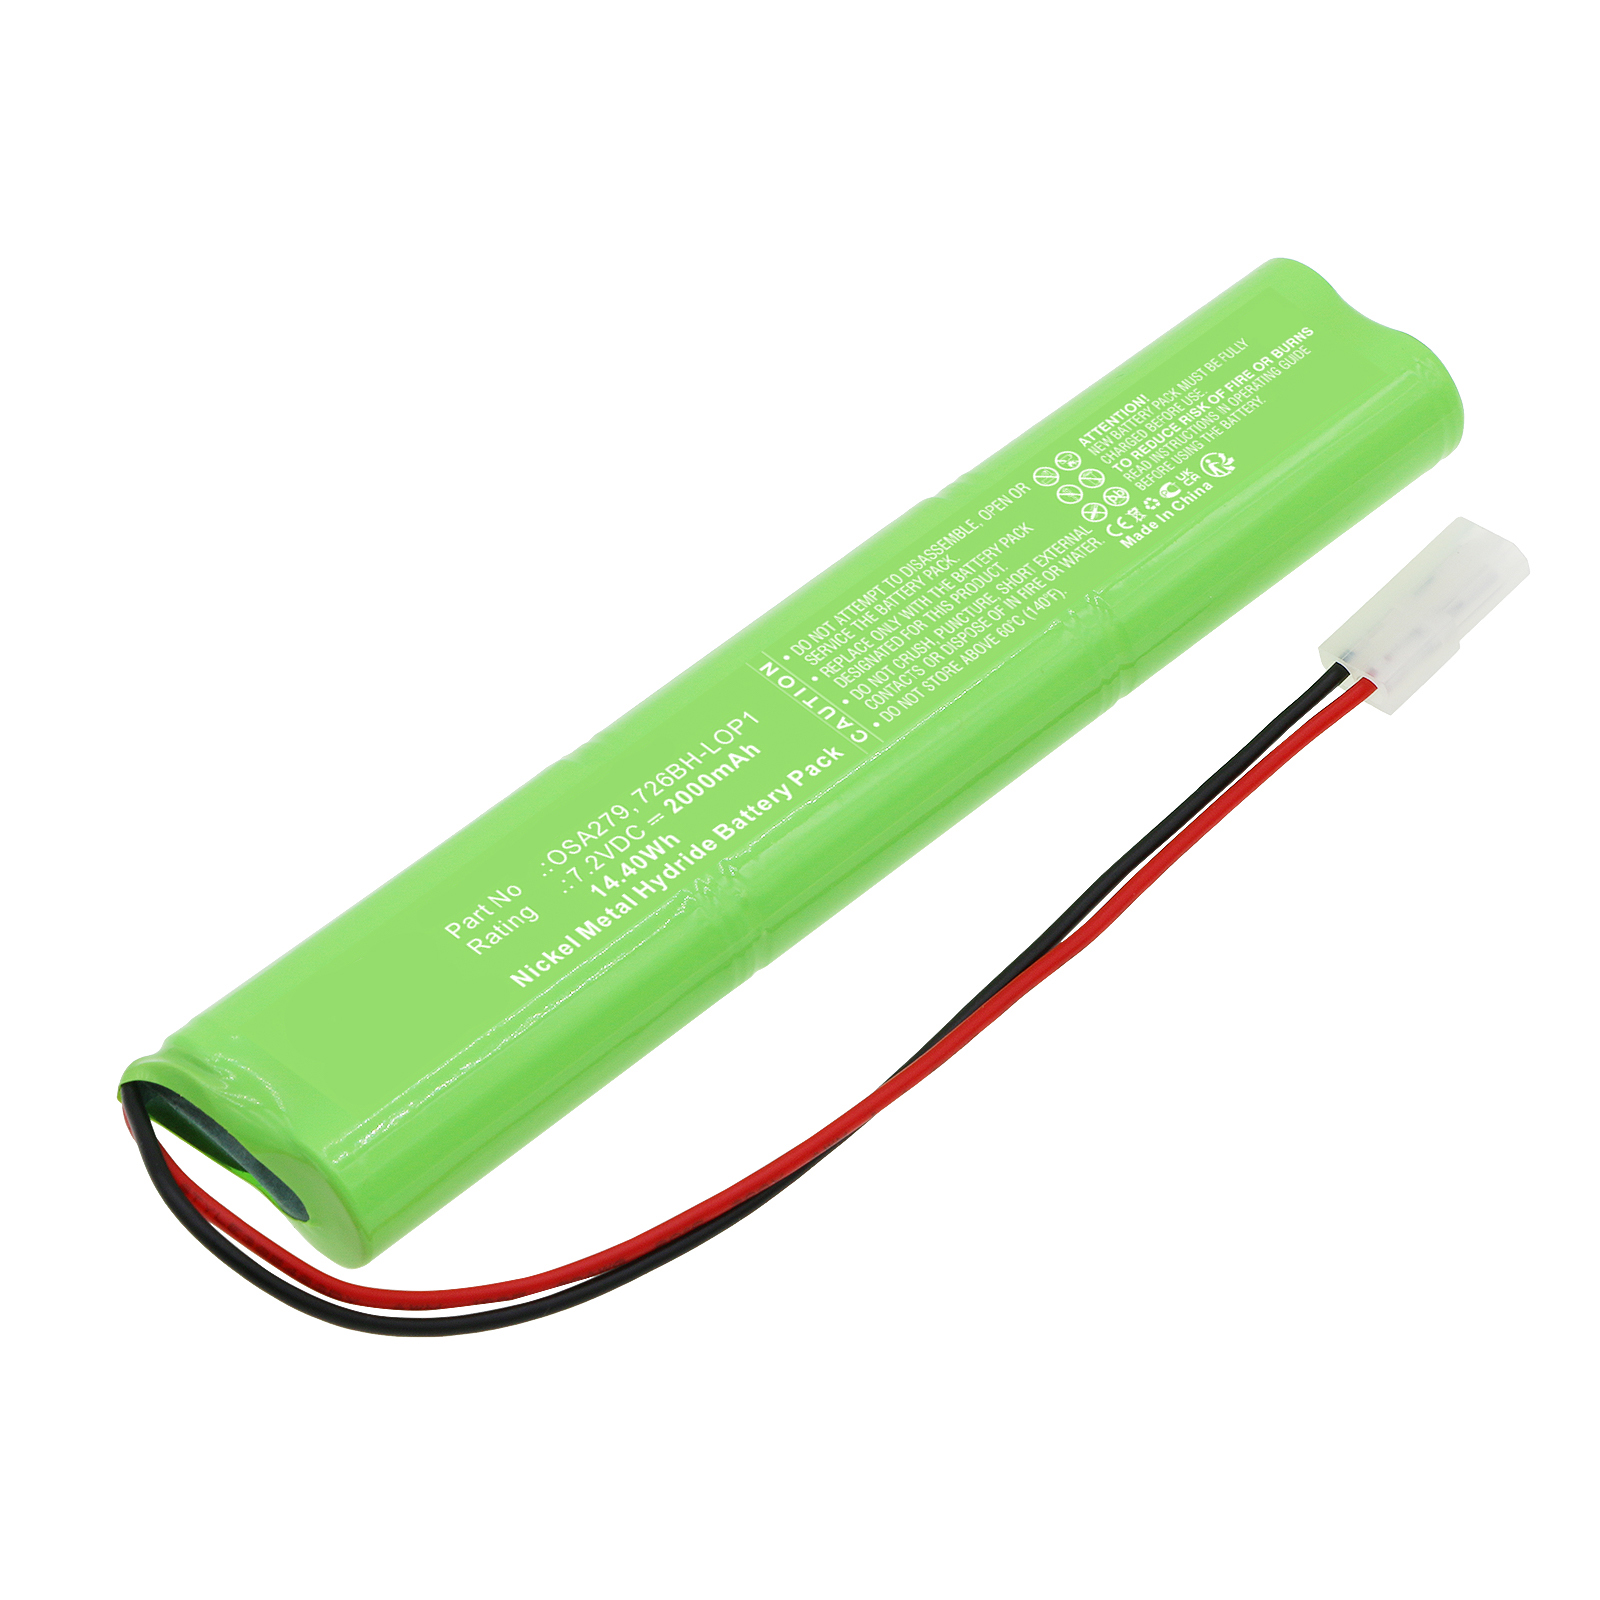 Synergy Digital Emergency Lighting Battery Compatible with Powersonic 726BH-LOP1 Emergency Lighting Battery (Ni-MH, 7.2V, 2000mAh)